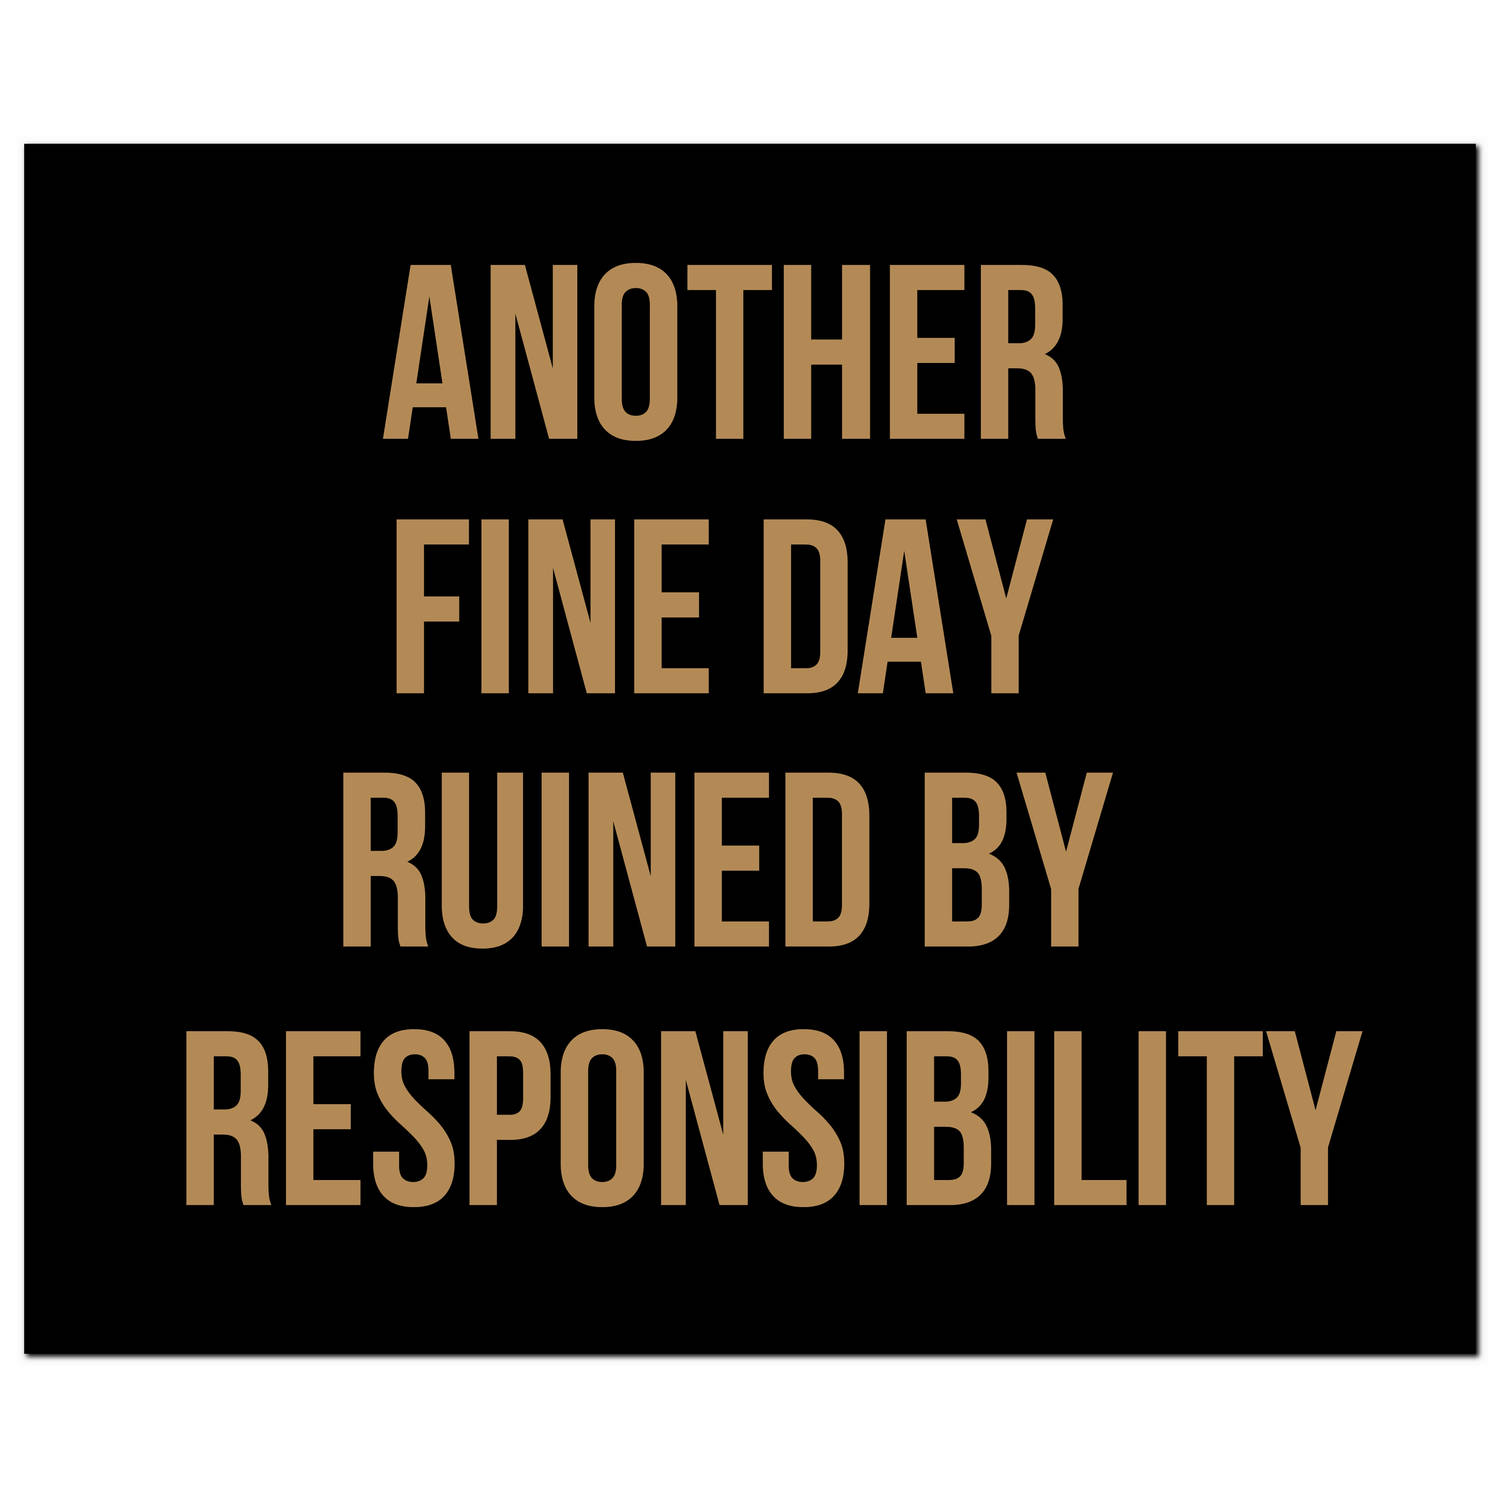 Another Fine Day Ruined By Responsibility Gold Foil Plaque - Image 1